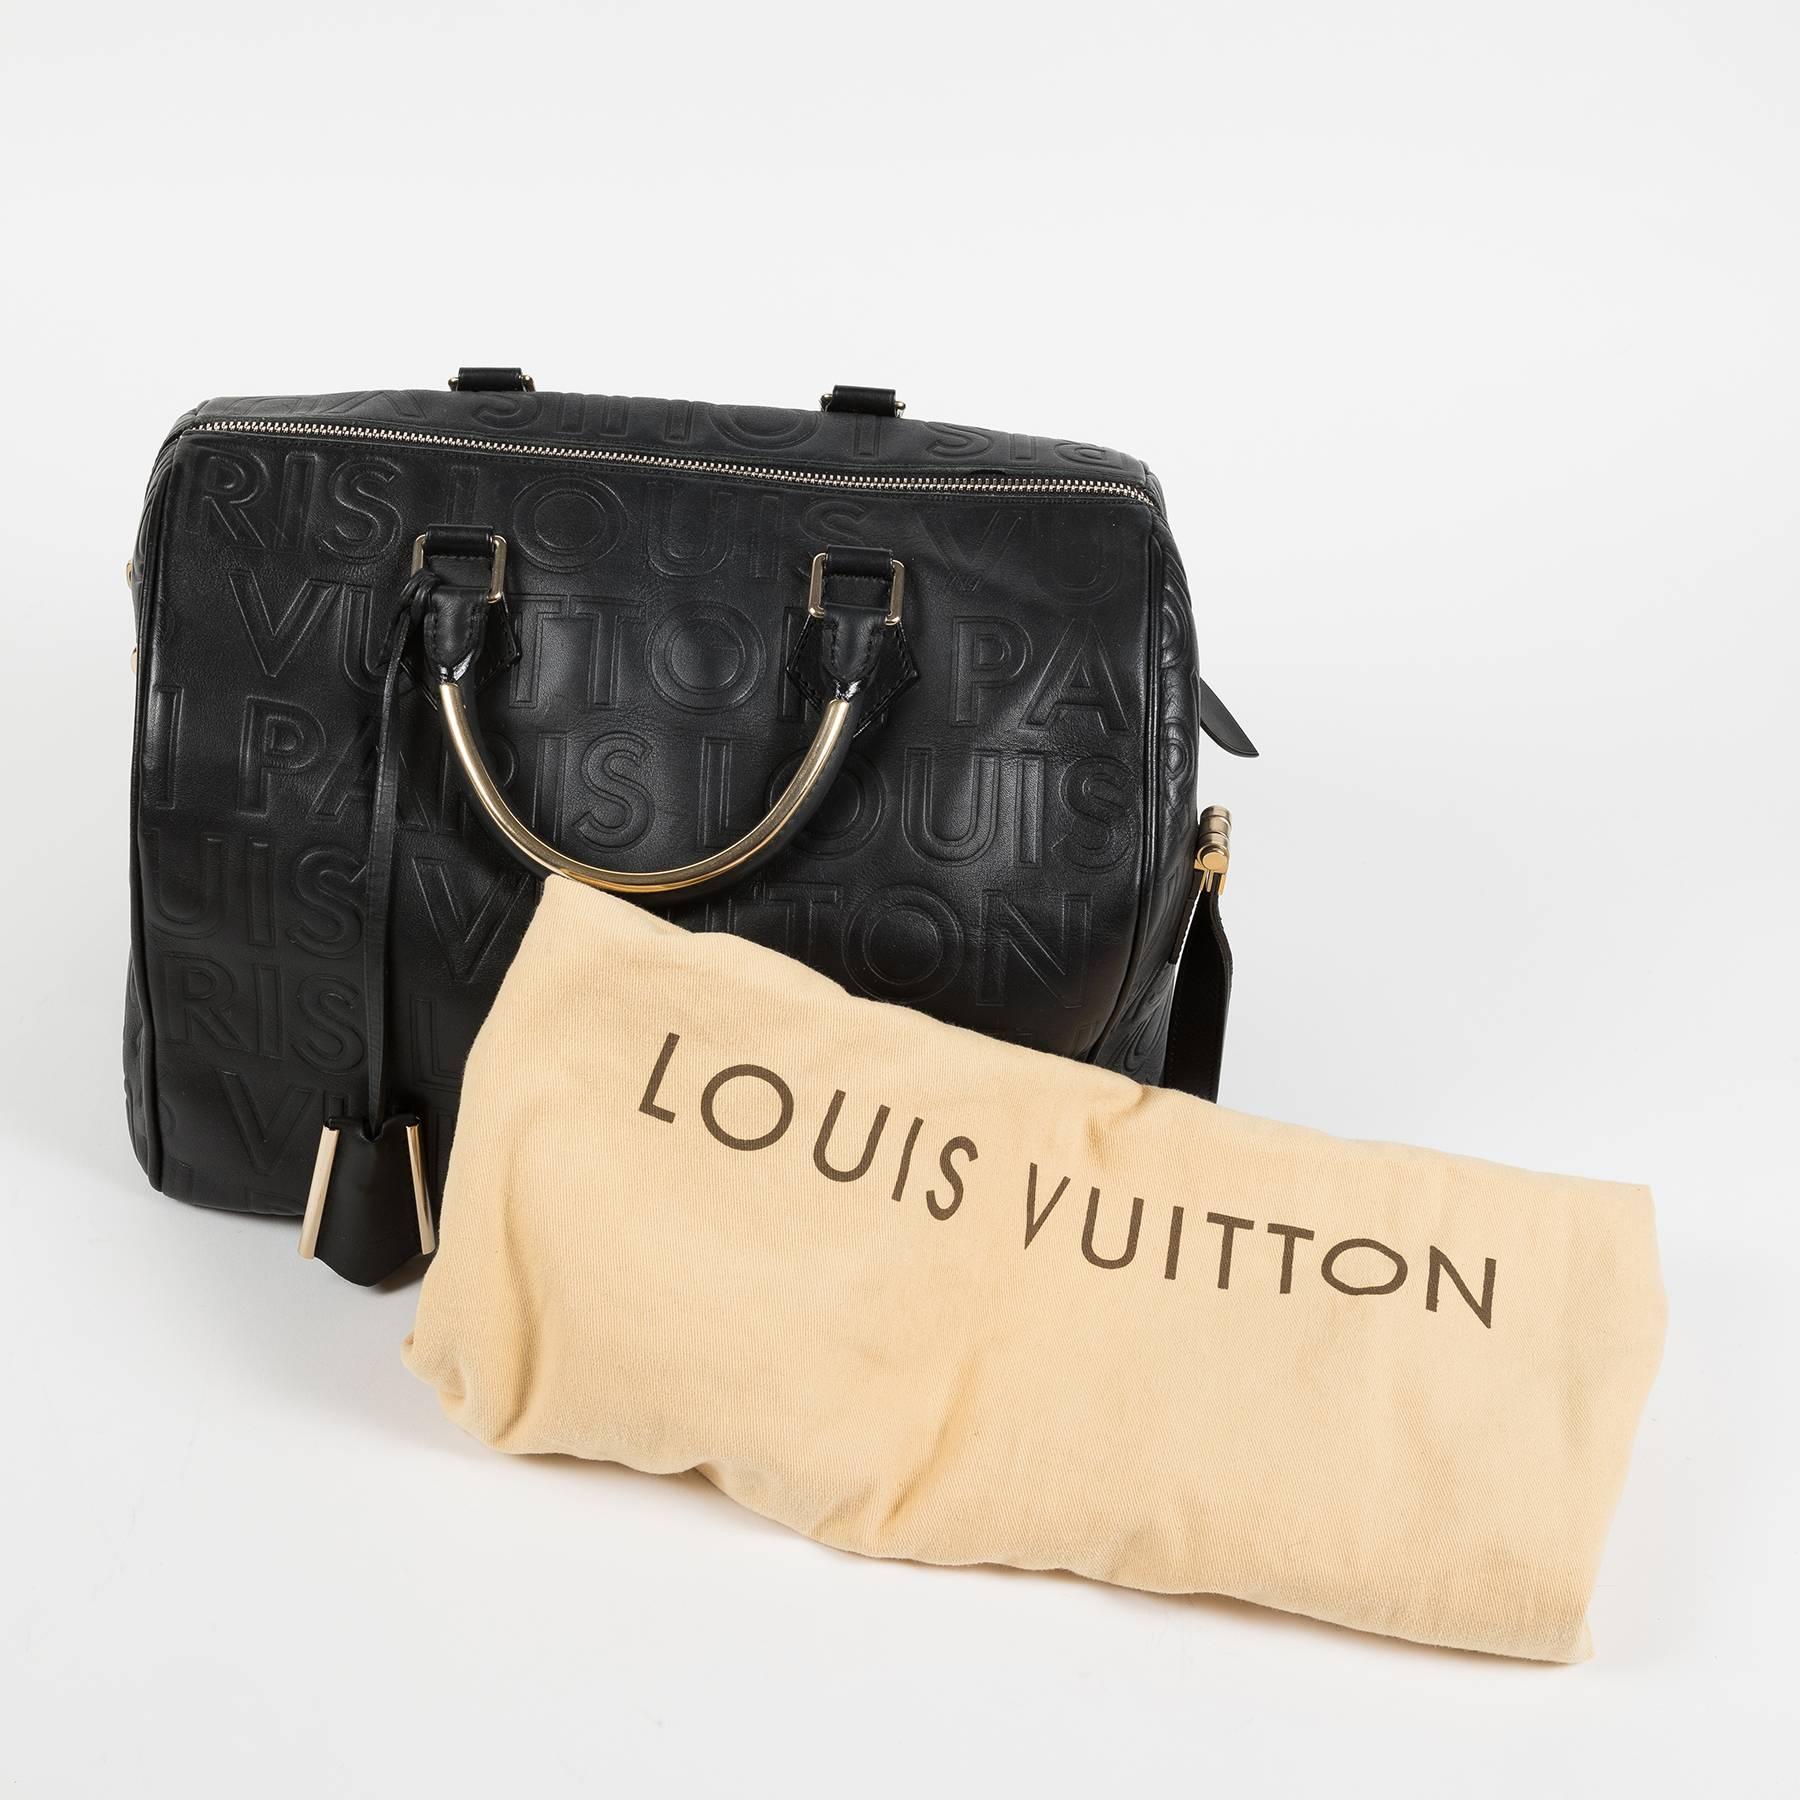 louis vuitton limited edition bags 2008